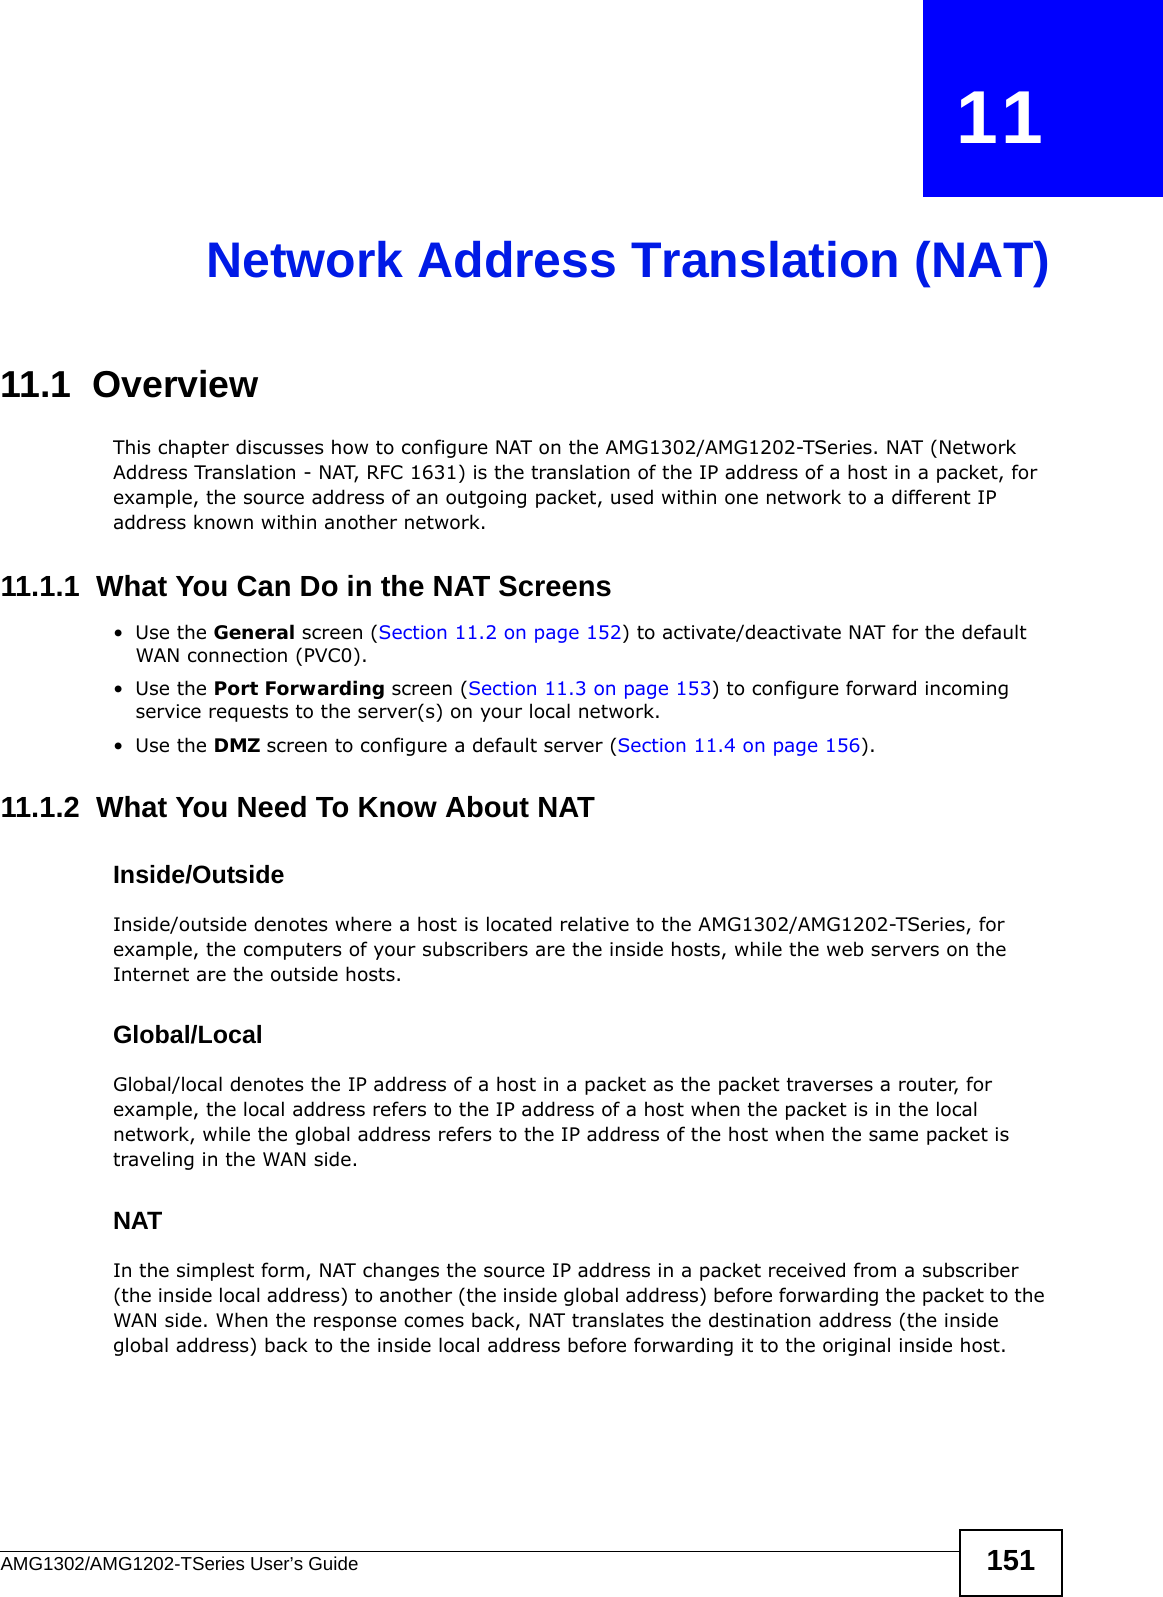 AMG1302/AMG1202-TSeries User’s Guide 151CHAPTER   11Network Address Translation (NAT)11.1  OverviewThis chapter discusses how to configure NAT on the AMG1302/AMG1202-TSeries. NAT (Network Address Translation - NAT, RFC 1631) is the translation of the IP address of a host in a packet, for example, the source address of an outgoing packet, used within one network to a different IP address known within another network.11.1.1  What You Can Do in the NAT Screens•Use the General screen (Section 11.2 on page 152) to activate/deactivate NAT for the default WAN connection (PVC0).•Use the Port Forwarding screen (Section 11.3 on page 153) to configure forward incoming service requests to the server(s) on your local network. •Use the DMZ screen to configure a default server (Section 11.4 on page 156).11.1.2  What You Need To Know About NATInside/OutsideInside/outside denotes where a host is located relative to the AMG1302/AMG1202-TSeries, for example, the computers of your subscribers are the inside hosts, while the web servers on the Internet are the outside hosts. Global/LocalGlobal/local denotes the IP address of a host in a packet as the packet traverses a router, for example, the local address refers to the IP address of a host when the packet is in the local network, while the global address refers to the IP address of the host when the same packet is traveling in the WAN side. NATIn the simplest form, NAT changes the source IP address in a packet received from a subscriber (the inside local address) to another (the inside global address) before forwarding the packet to the WAN side. When the response comes back, NAT translates the destination address (the inside global address) back to the inside local address before forwarding it to the original inside host.